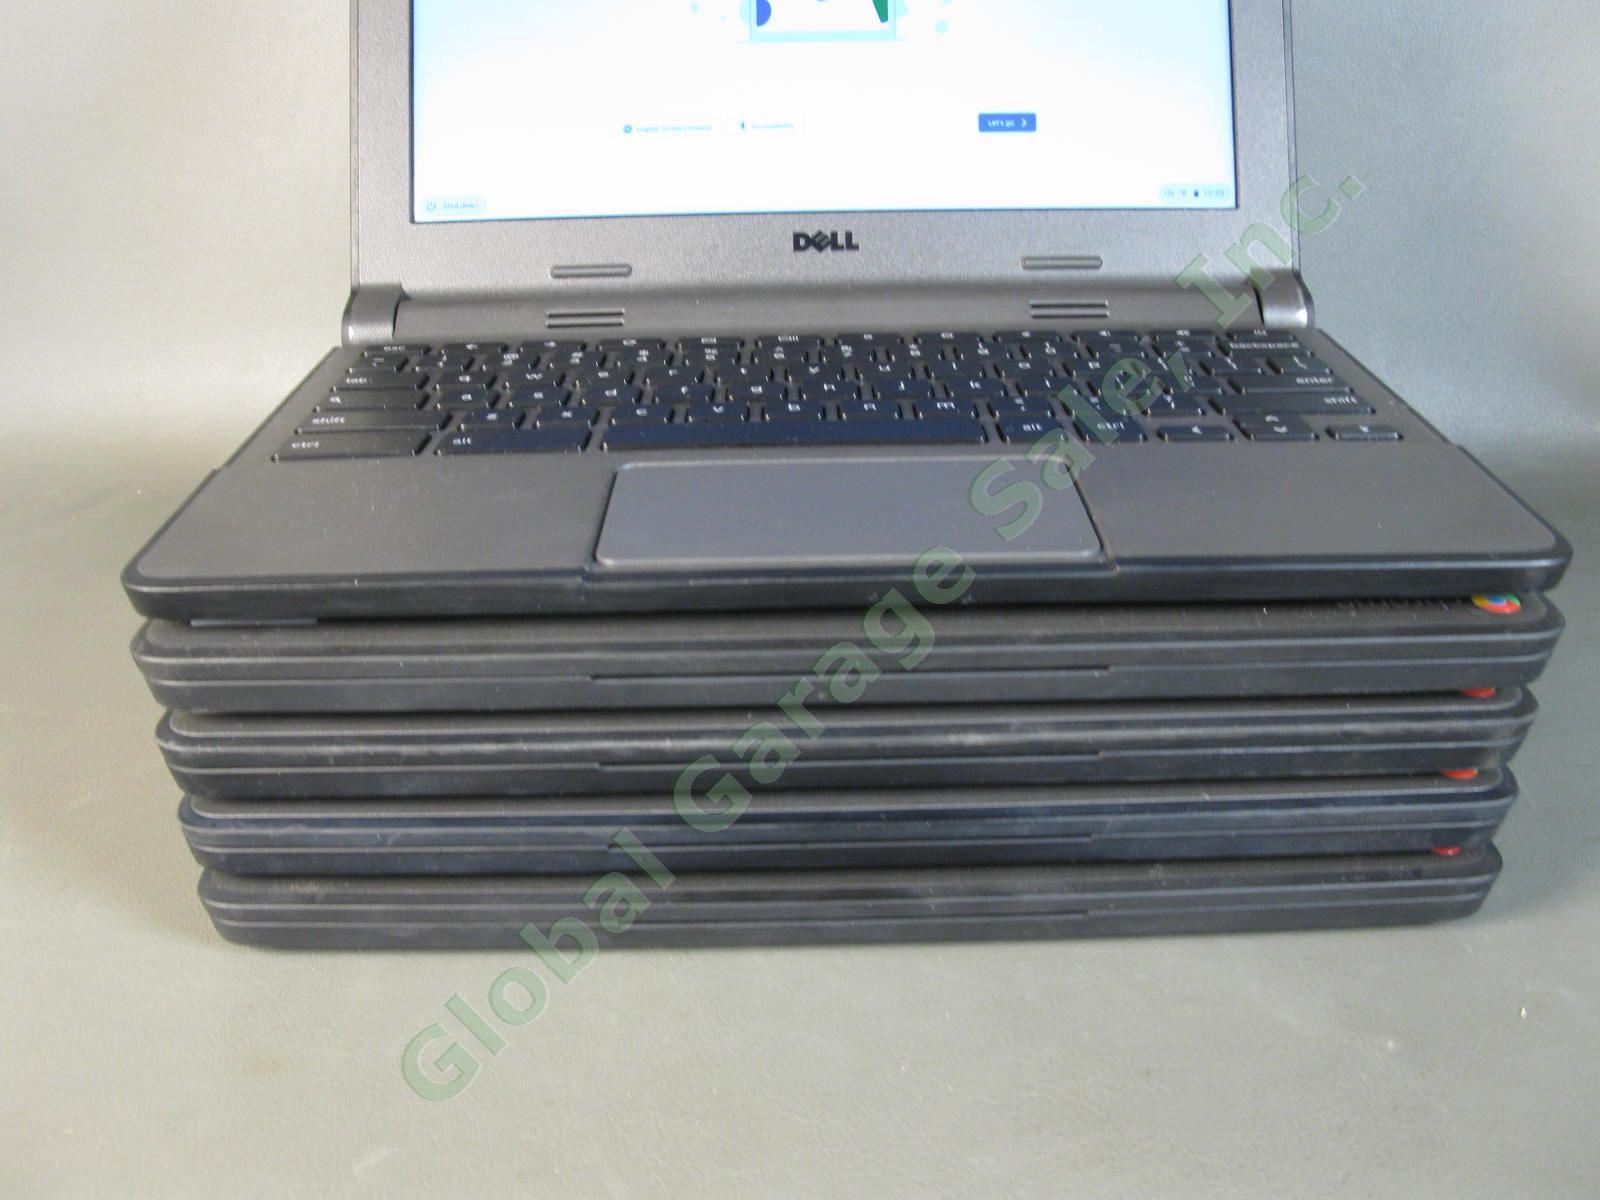 LOT of 10 Dell Chromebook 11 3120 P22T Laptop Computer 16GB SSD 4GB RAM Chargers 1